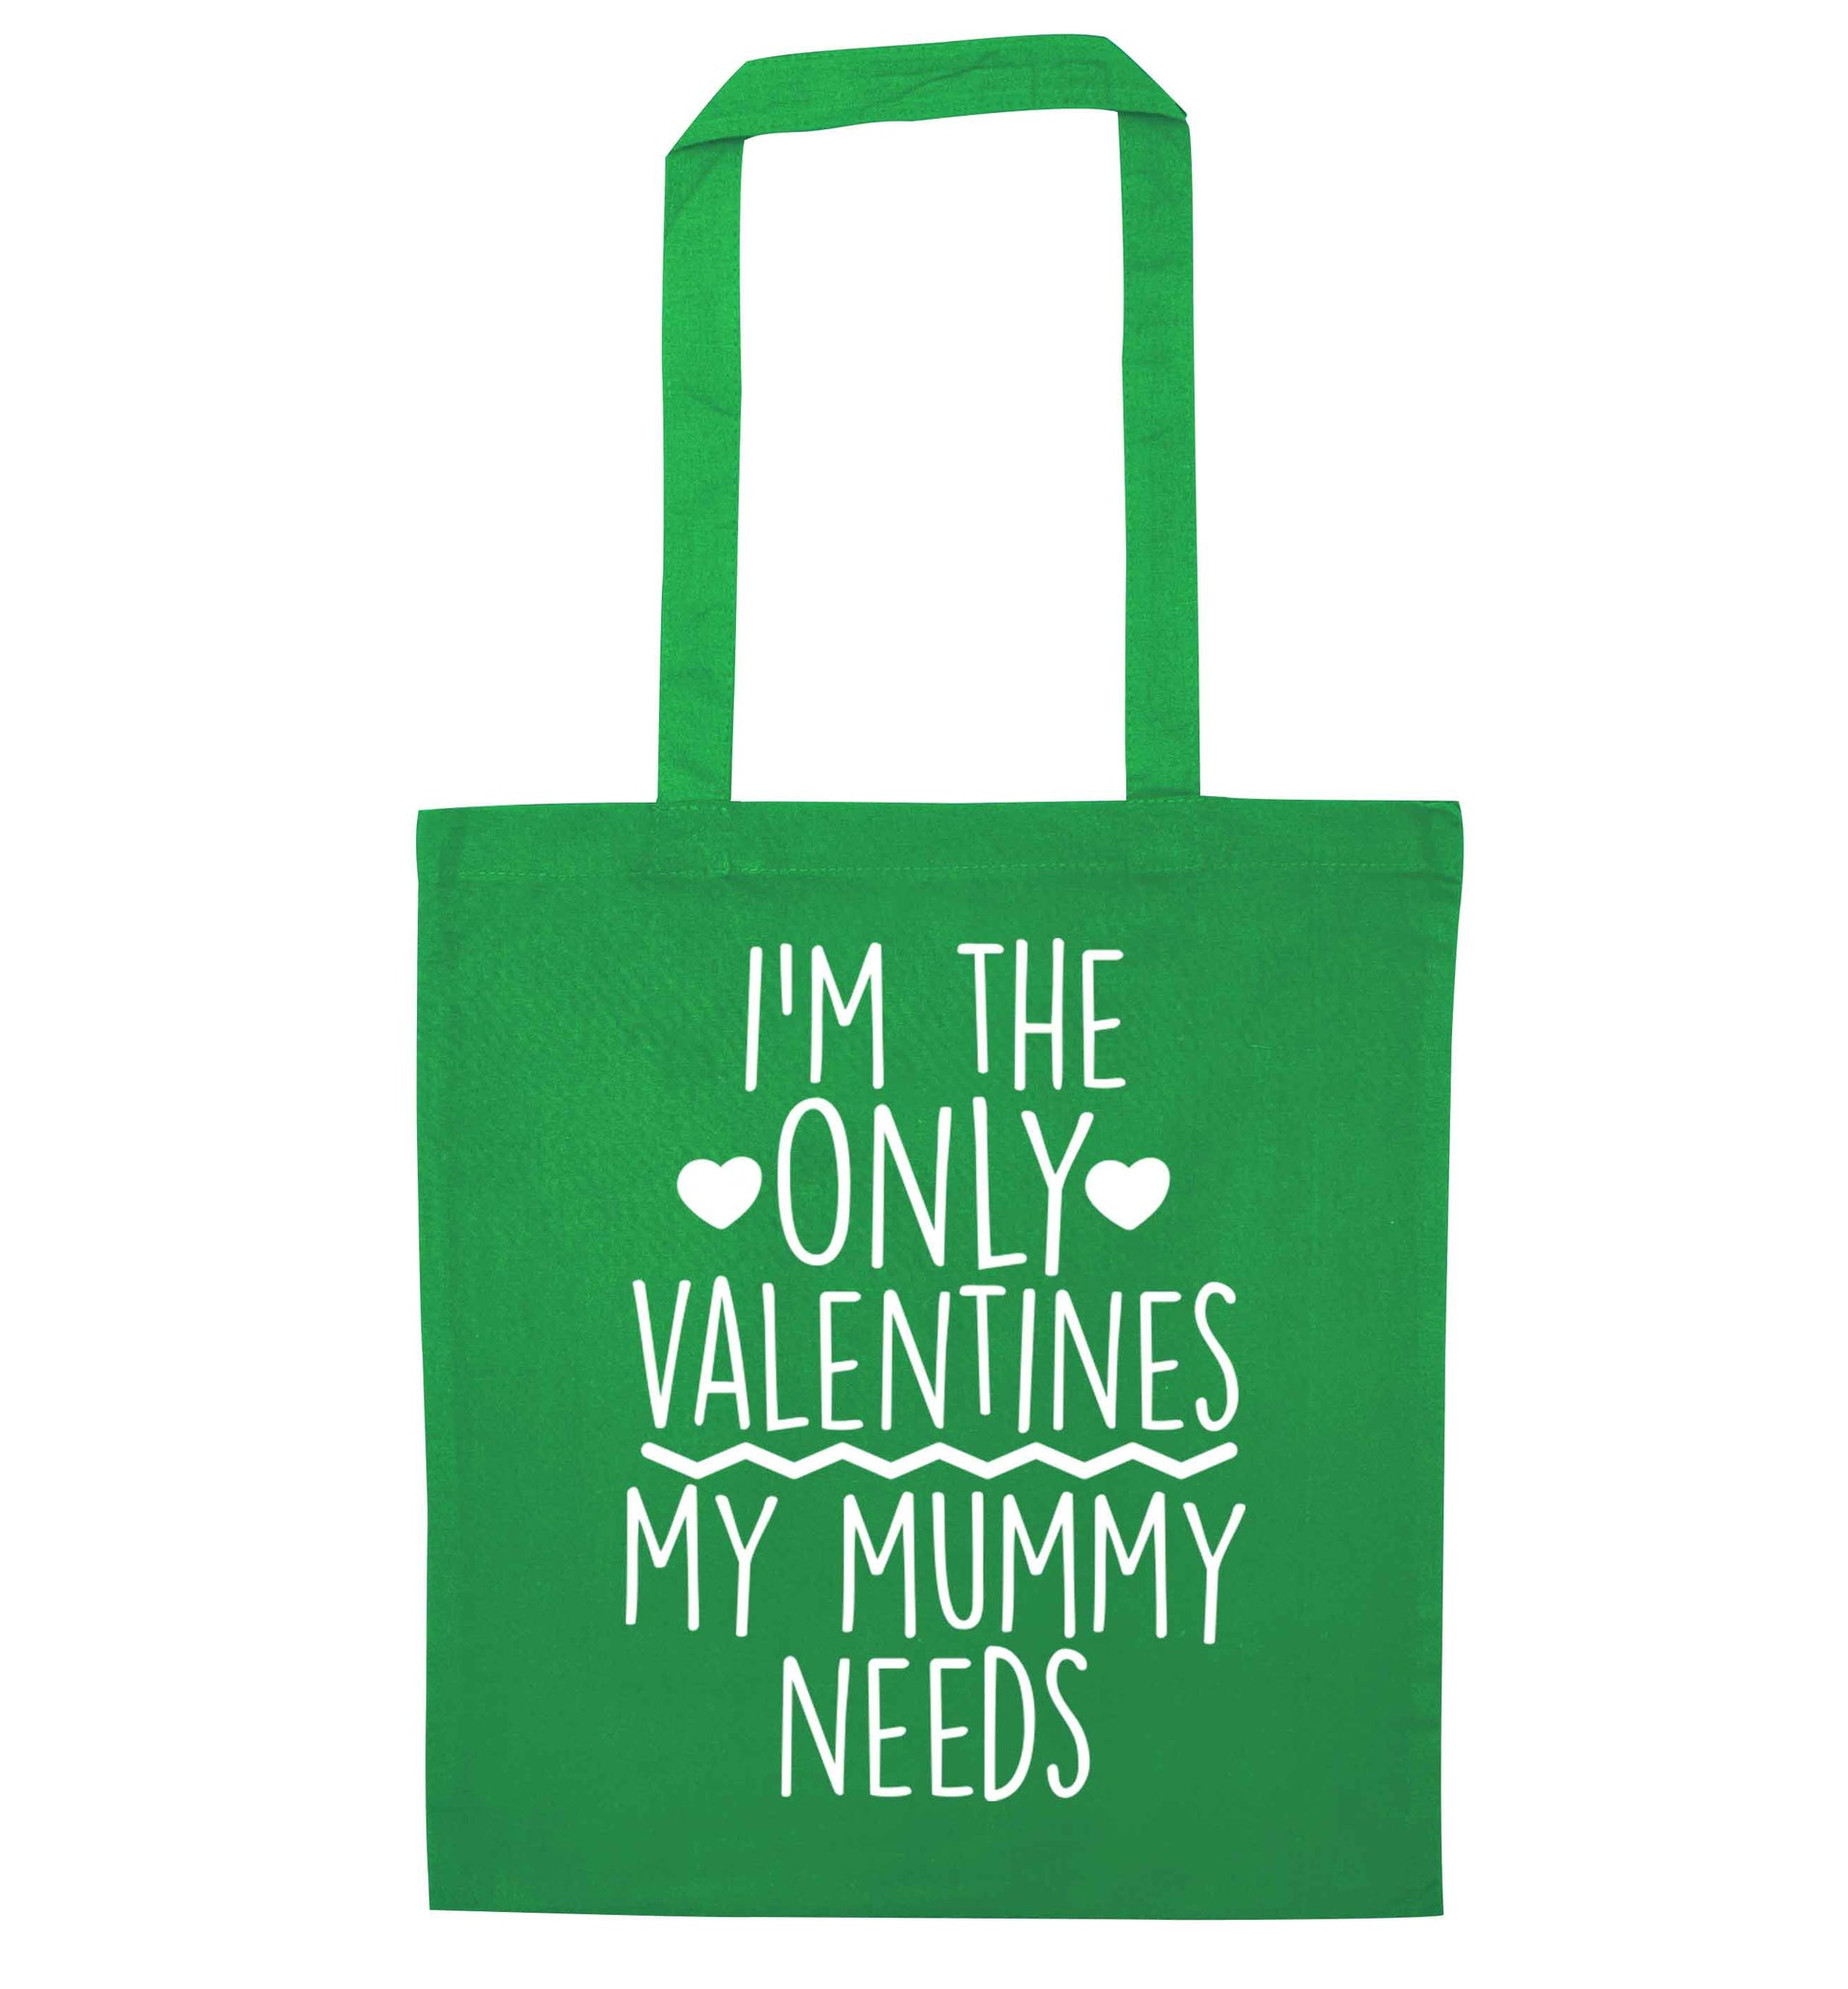 I'm the only valentines my mummy needs green tote bag